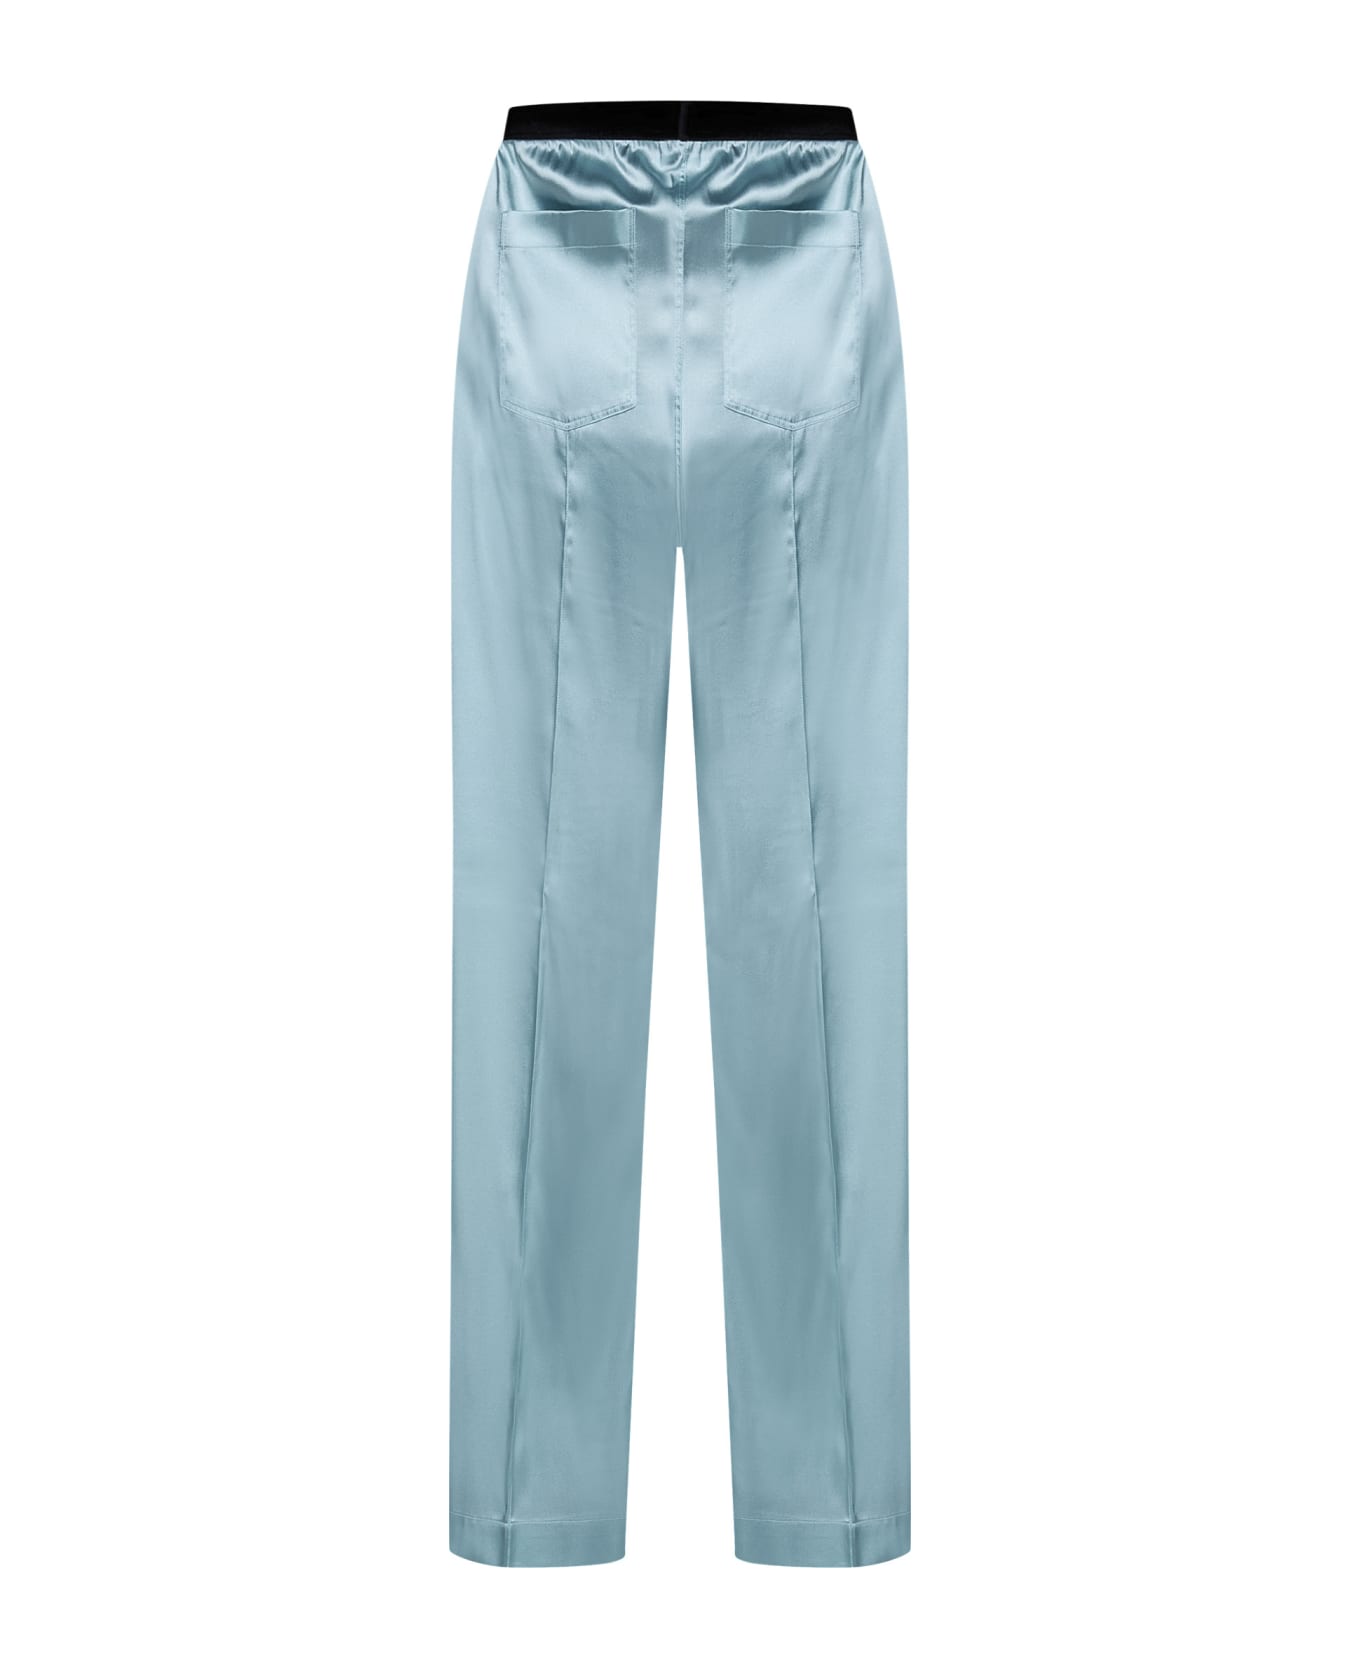 Tom Ford Trousers - BLUE